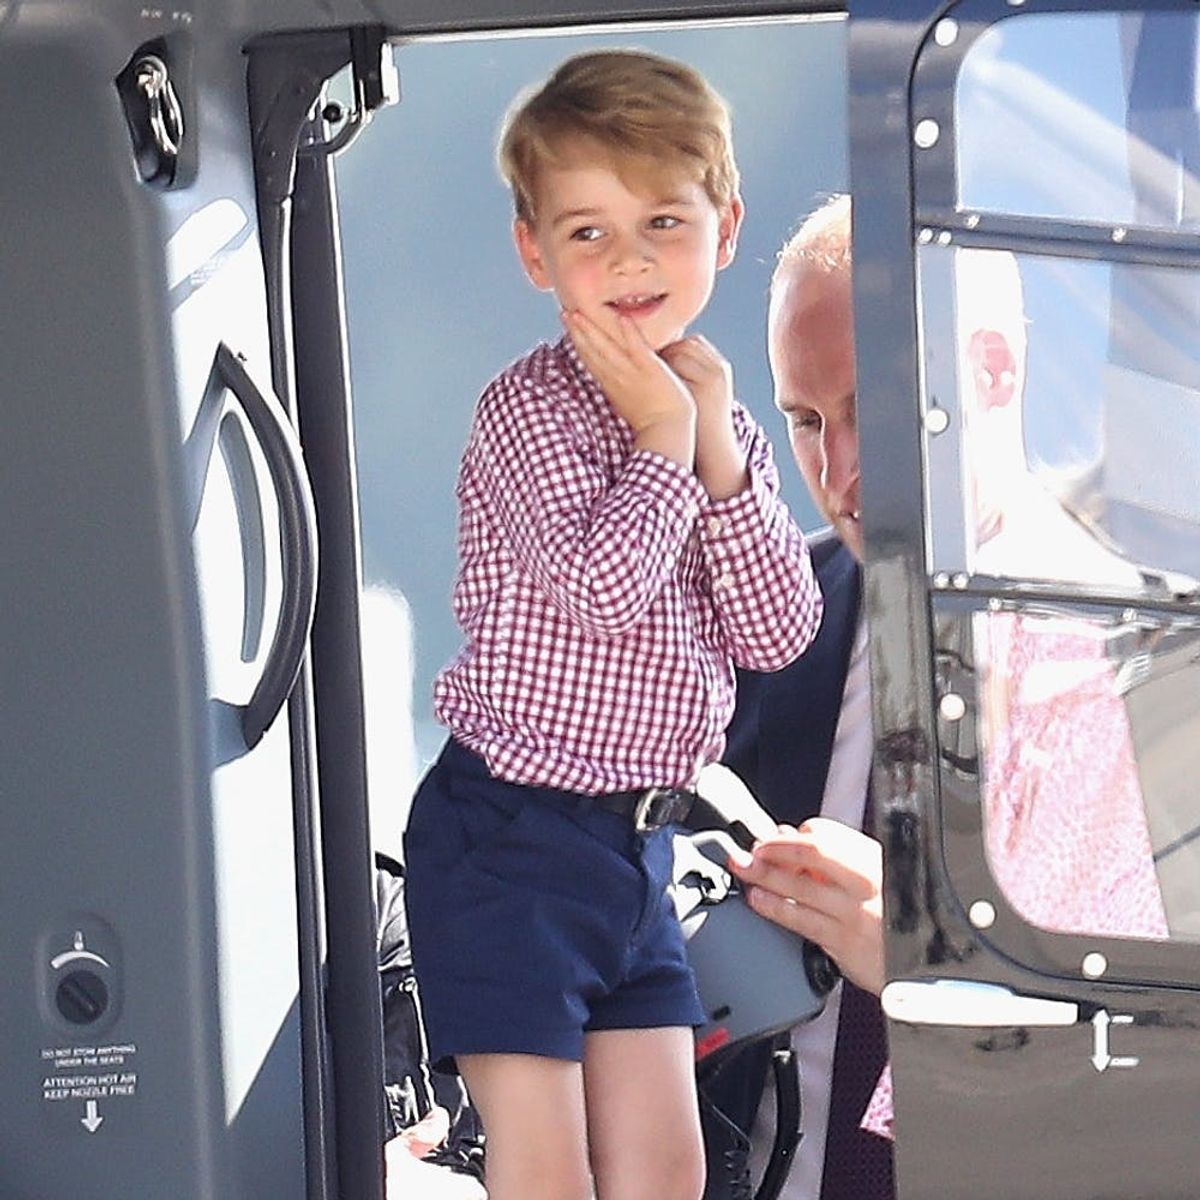 Prince George’s Official 4th Birthday Portrait Will Instantly Melt Your Heart